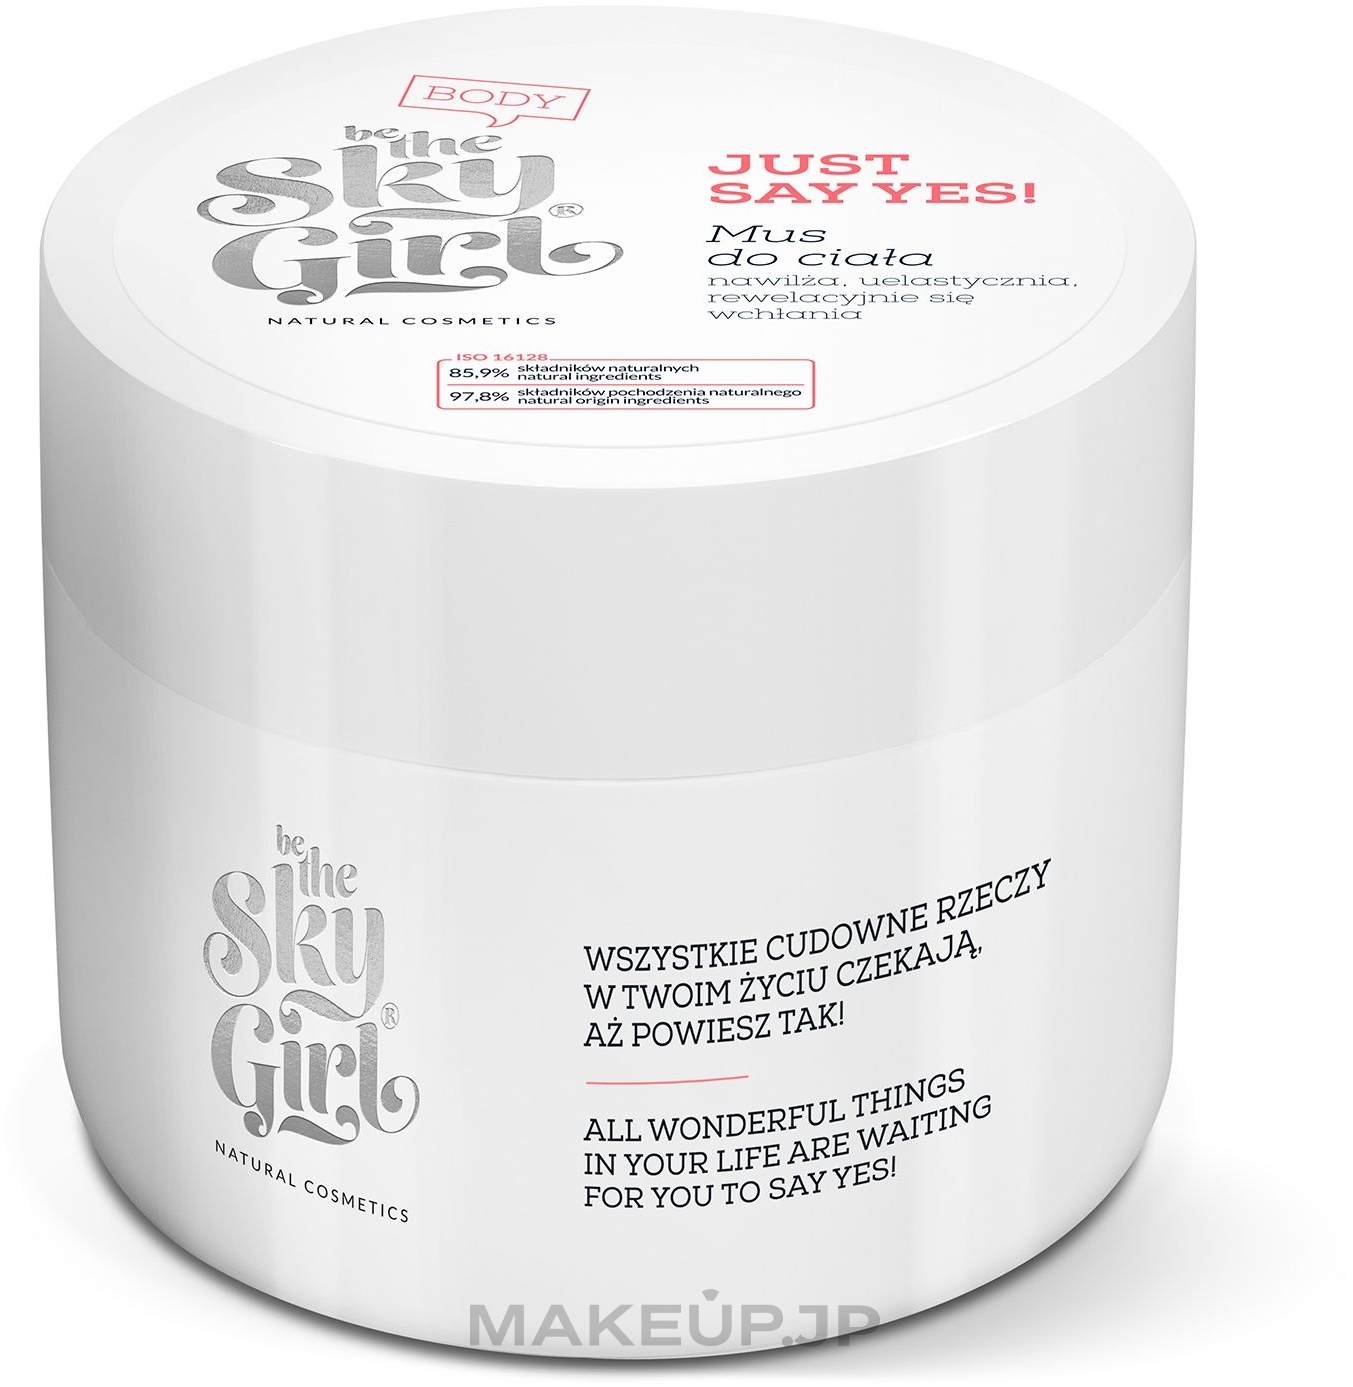 Body Mousse - Be the Sky Girl "Just Say Yes!" Body Mousse — photo 200 ml